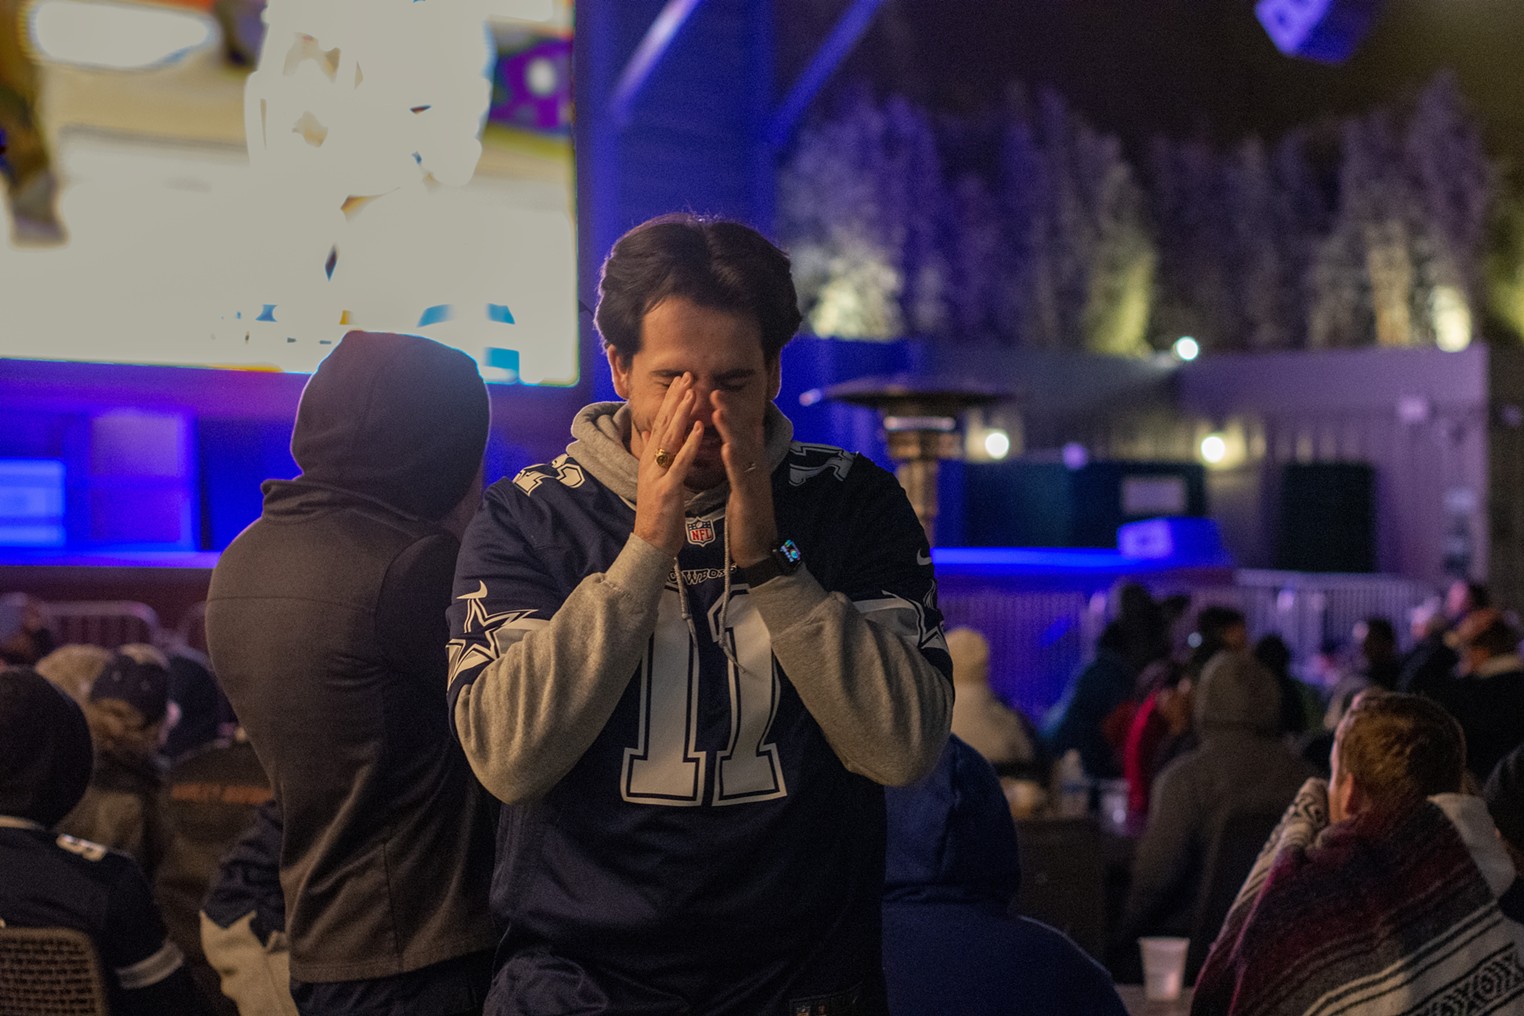 Cowboy fans looked bored and overwhelmed during Sunday’s game